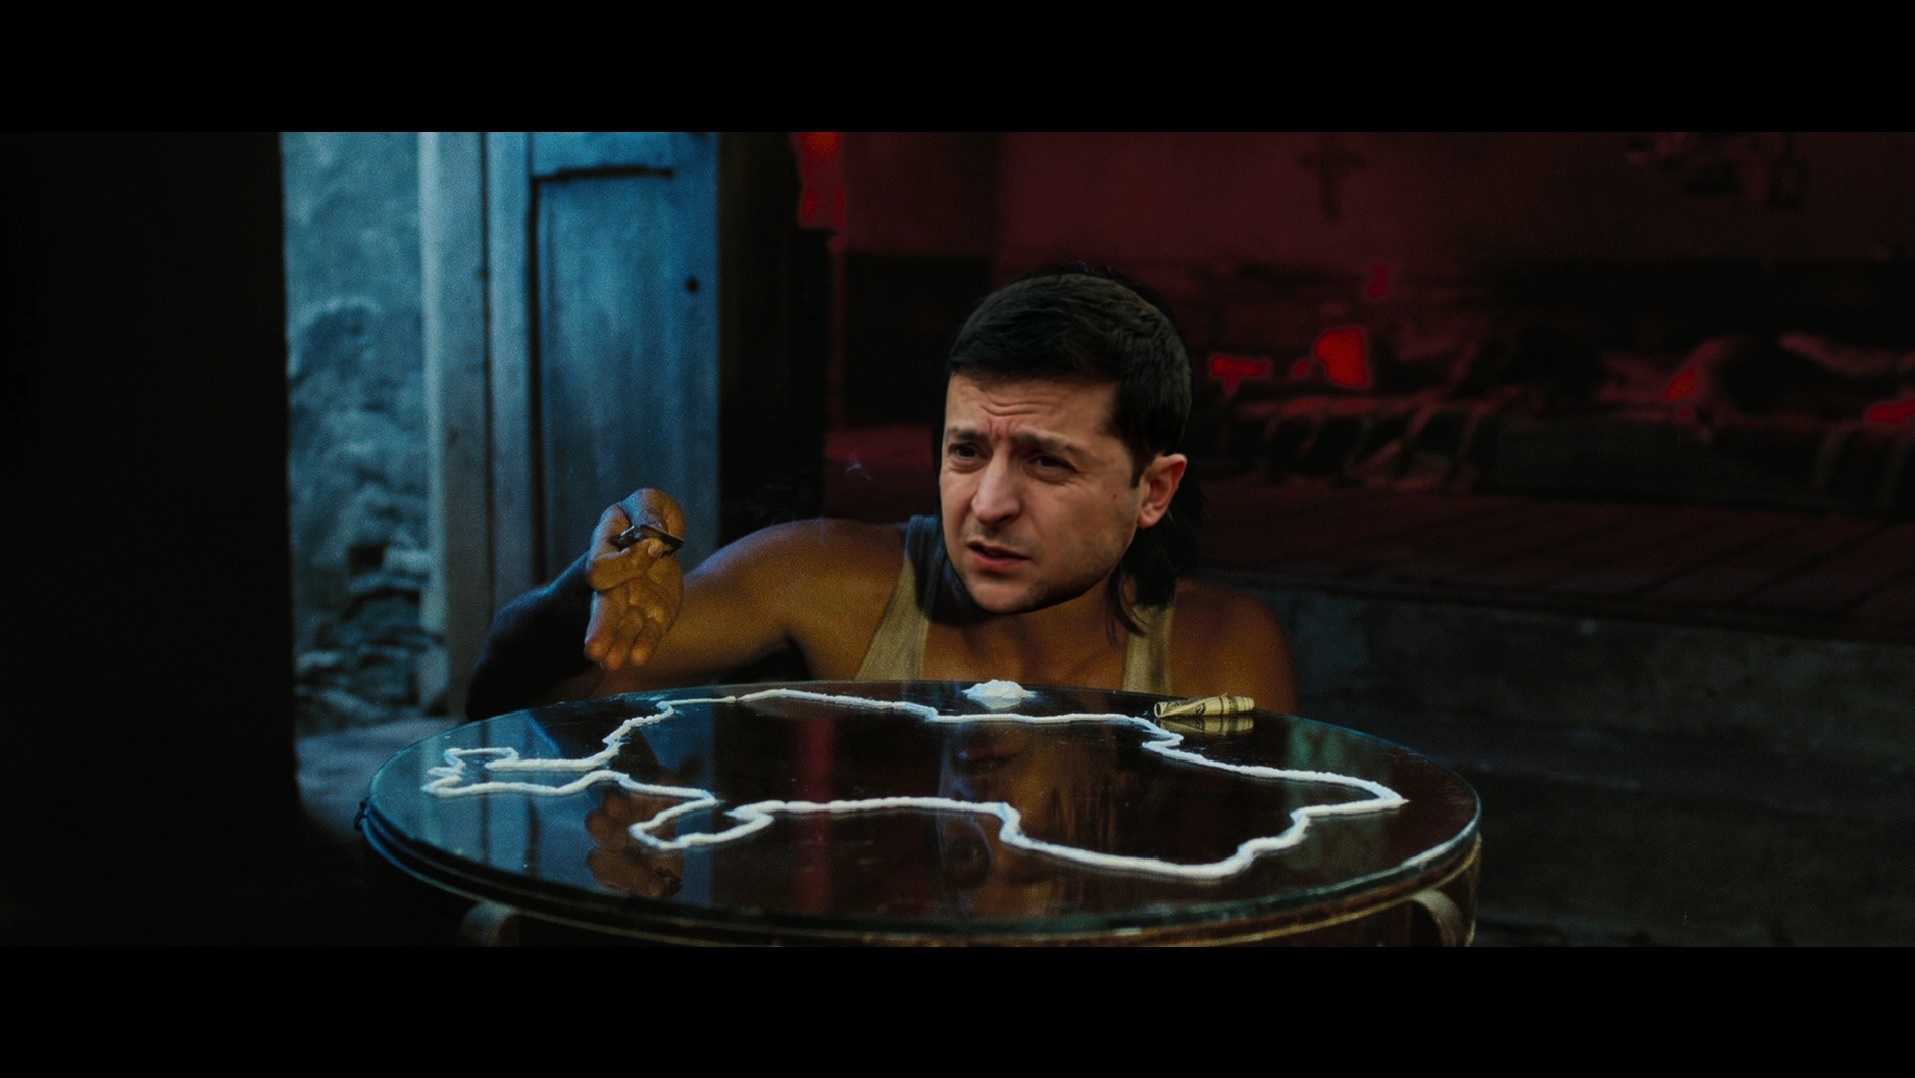 Baron of Arms - My, Screenshot, Baron of Arms, Vladimir Zelensky, Photoshop, Rukozhop, Cocaine, Drugs, Scene from the movie, Politics, Cartography, Entertaining cartography, 